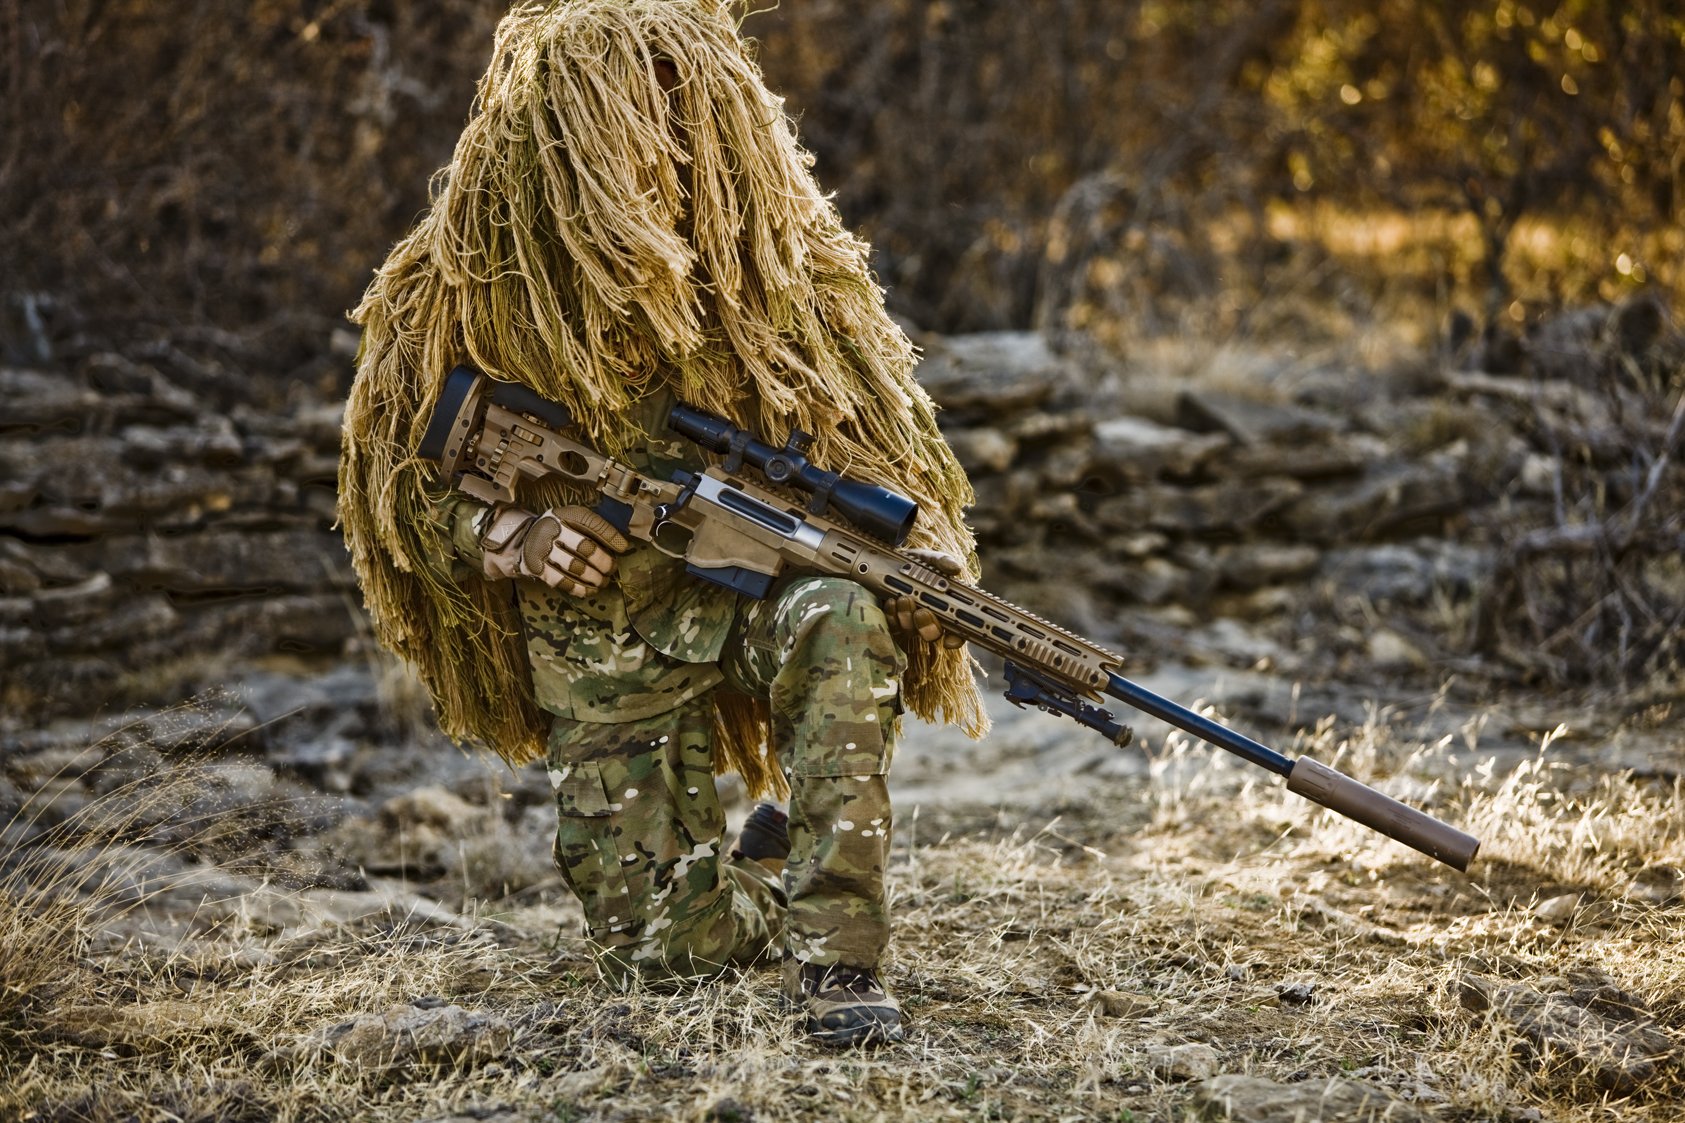 sniper, Rifle, Camouflage, Soldier, Military, 1685x1123 Wallpaper